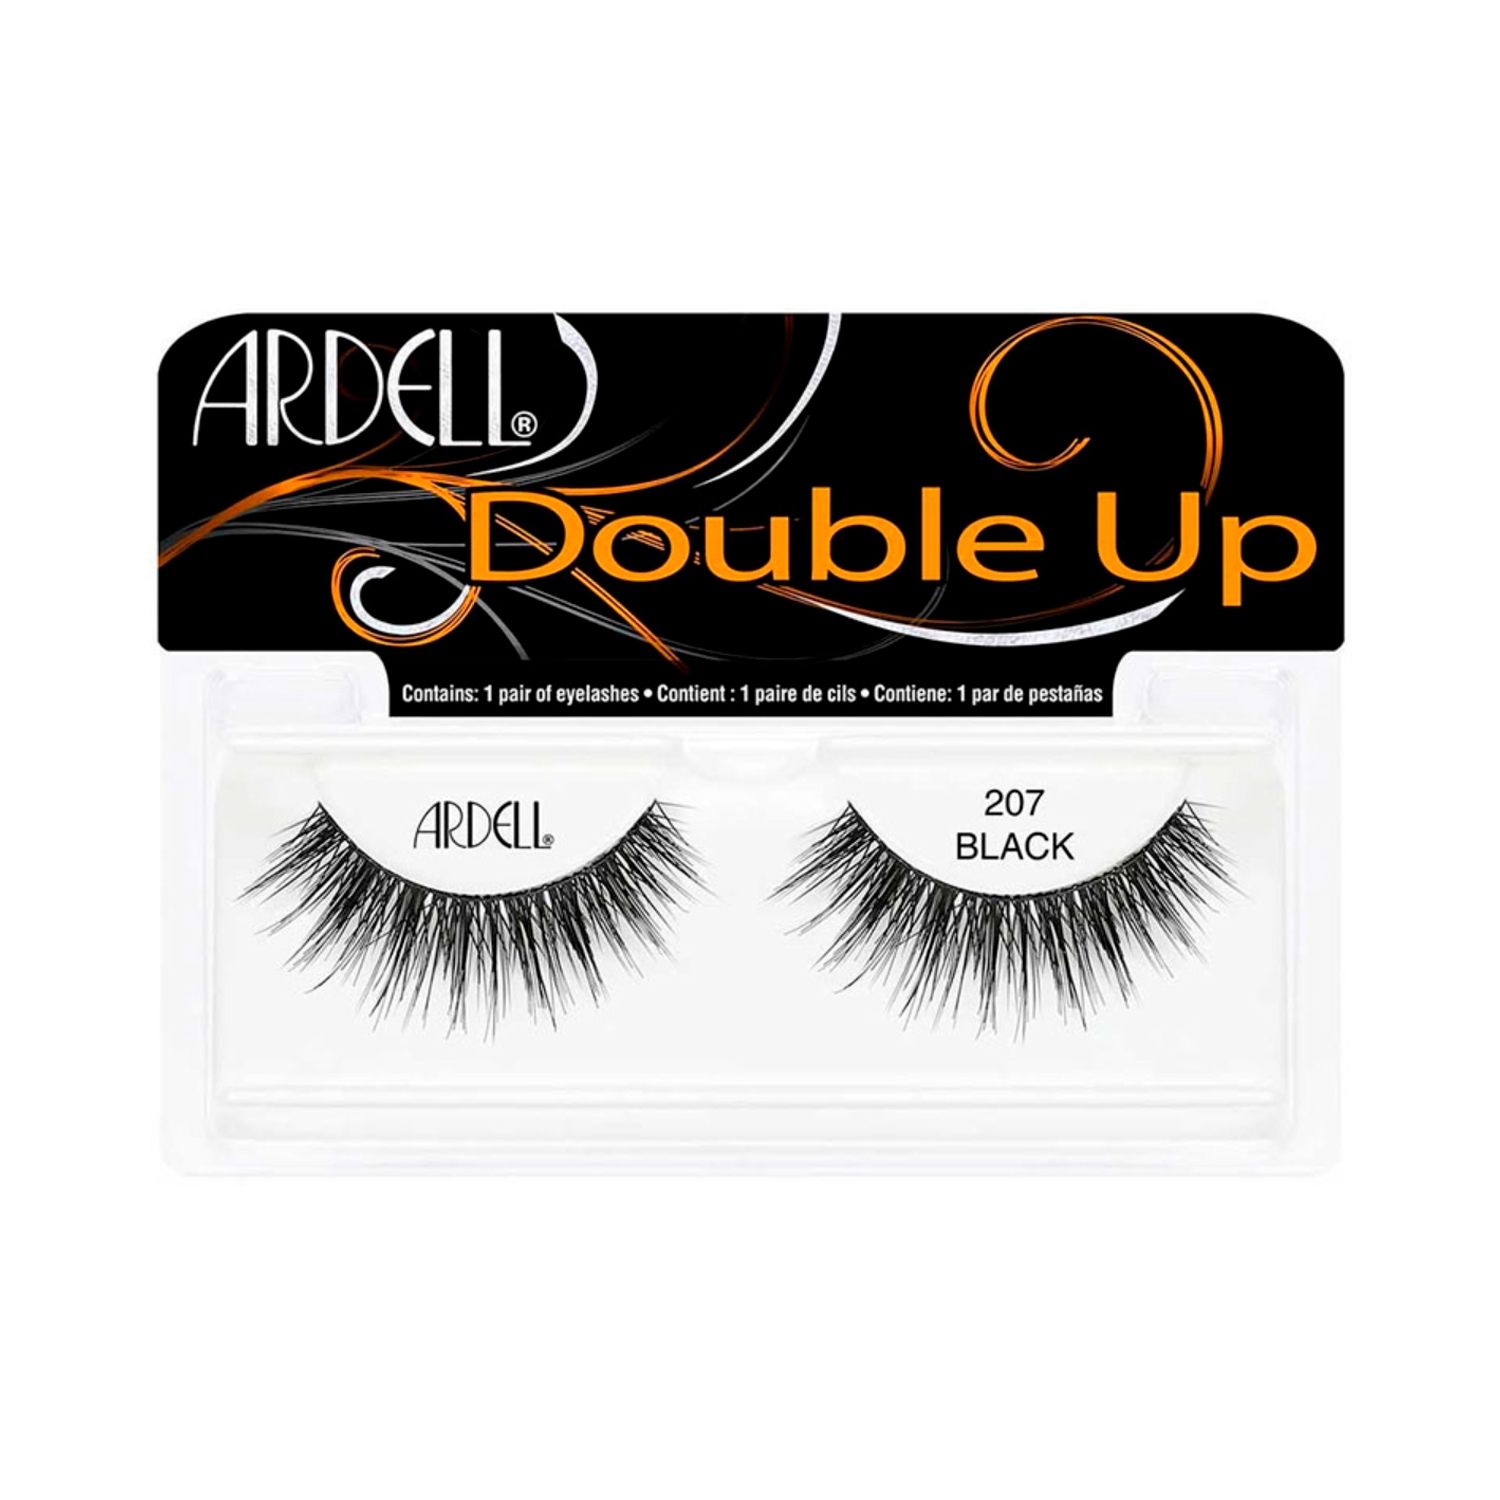 Ardell | Ardell Double Up Eyelashes 207 Black - 61913 (1 Pair)